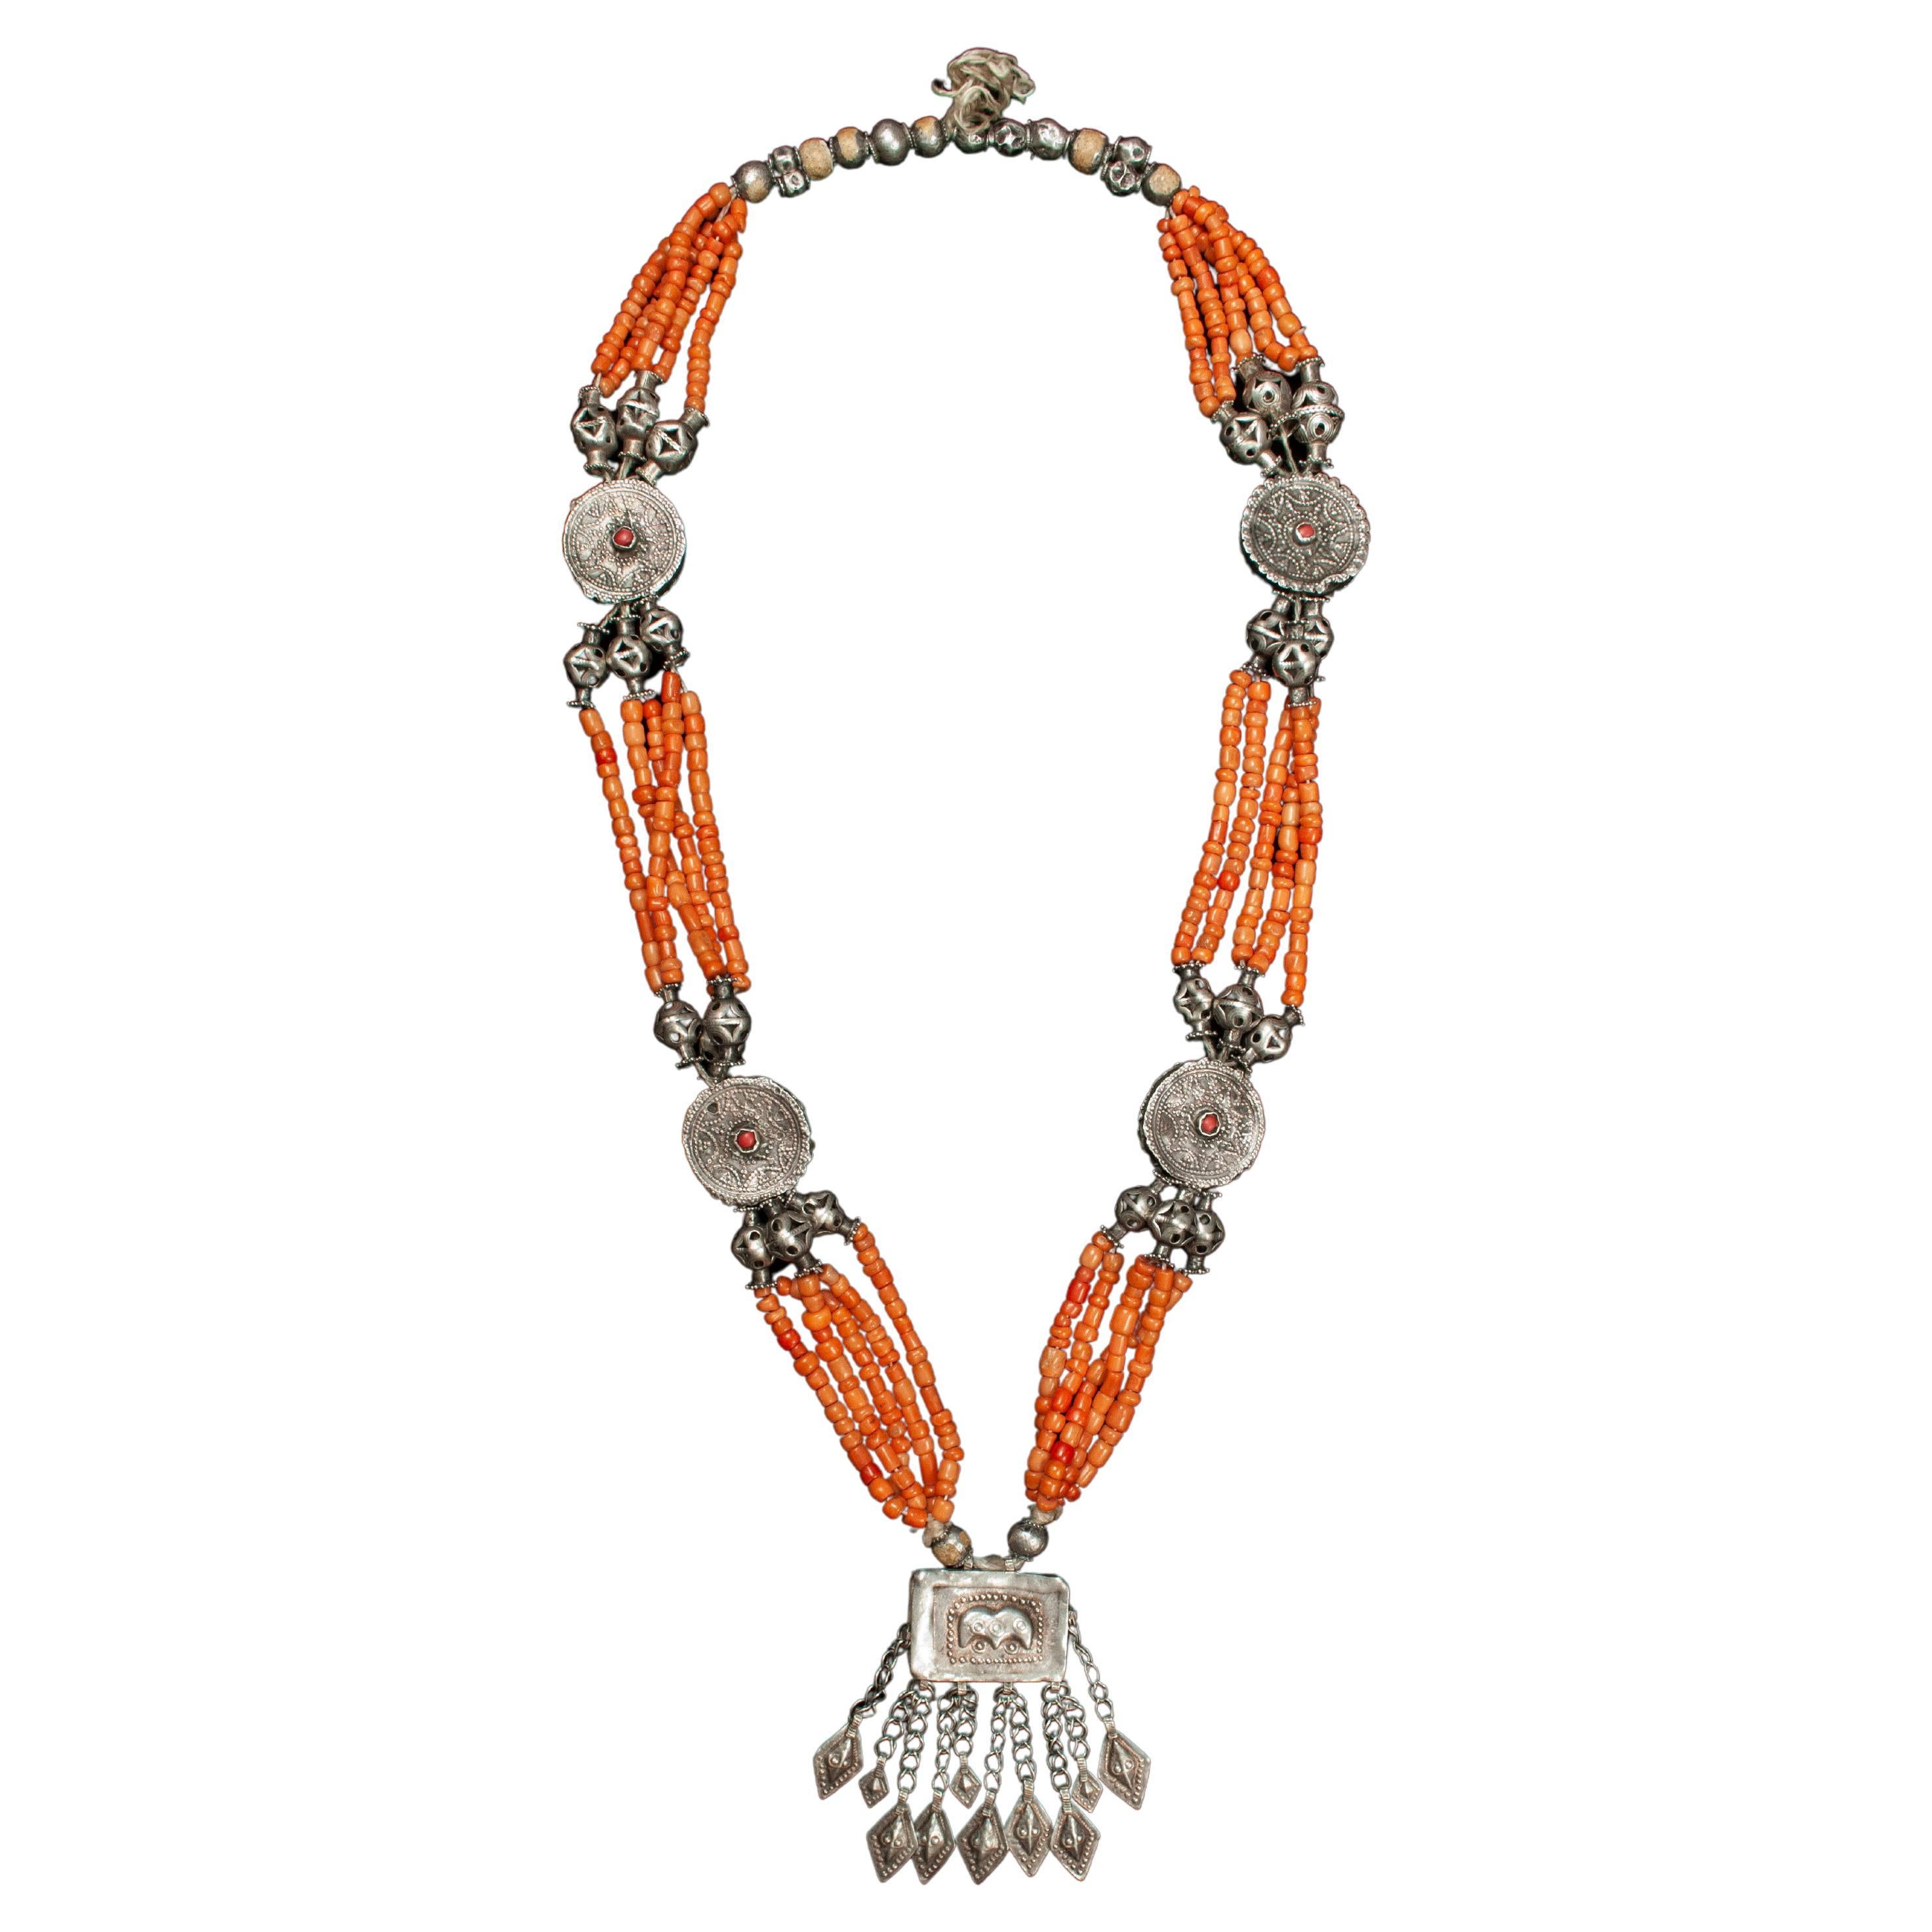 19th-Early 20th Century Coral Wedding Necklace, Tajikistan, Central Asia